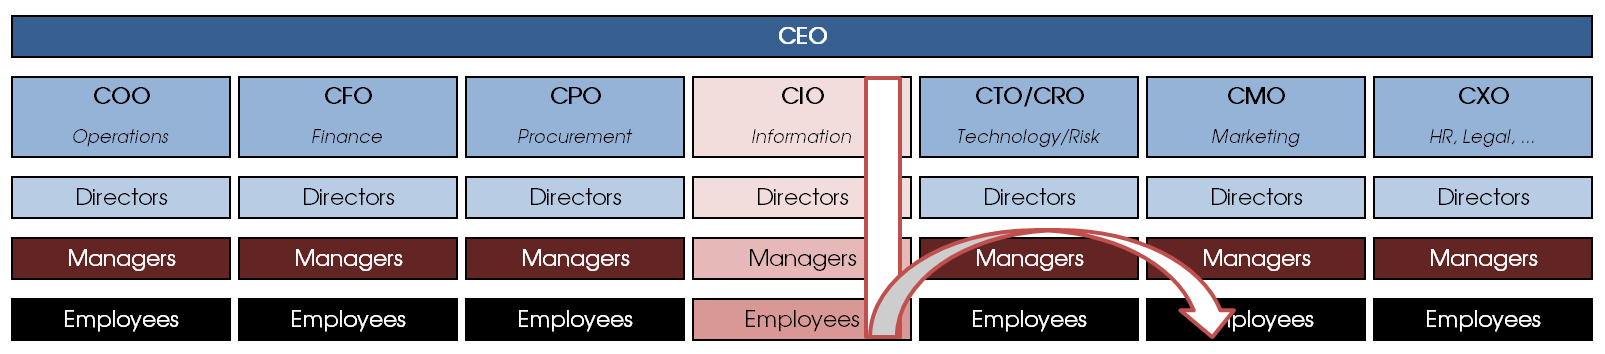 The inverted-T model of data governance (DG): a DG office is established top-down in one area and then spreads out to other areas, where it reaches the respective executives by word of mouth from the bottom up